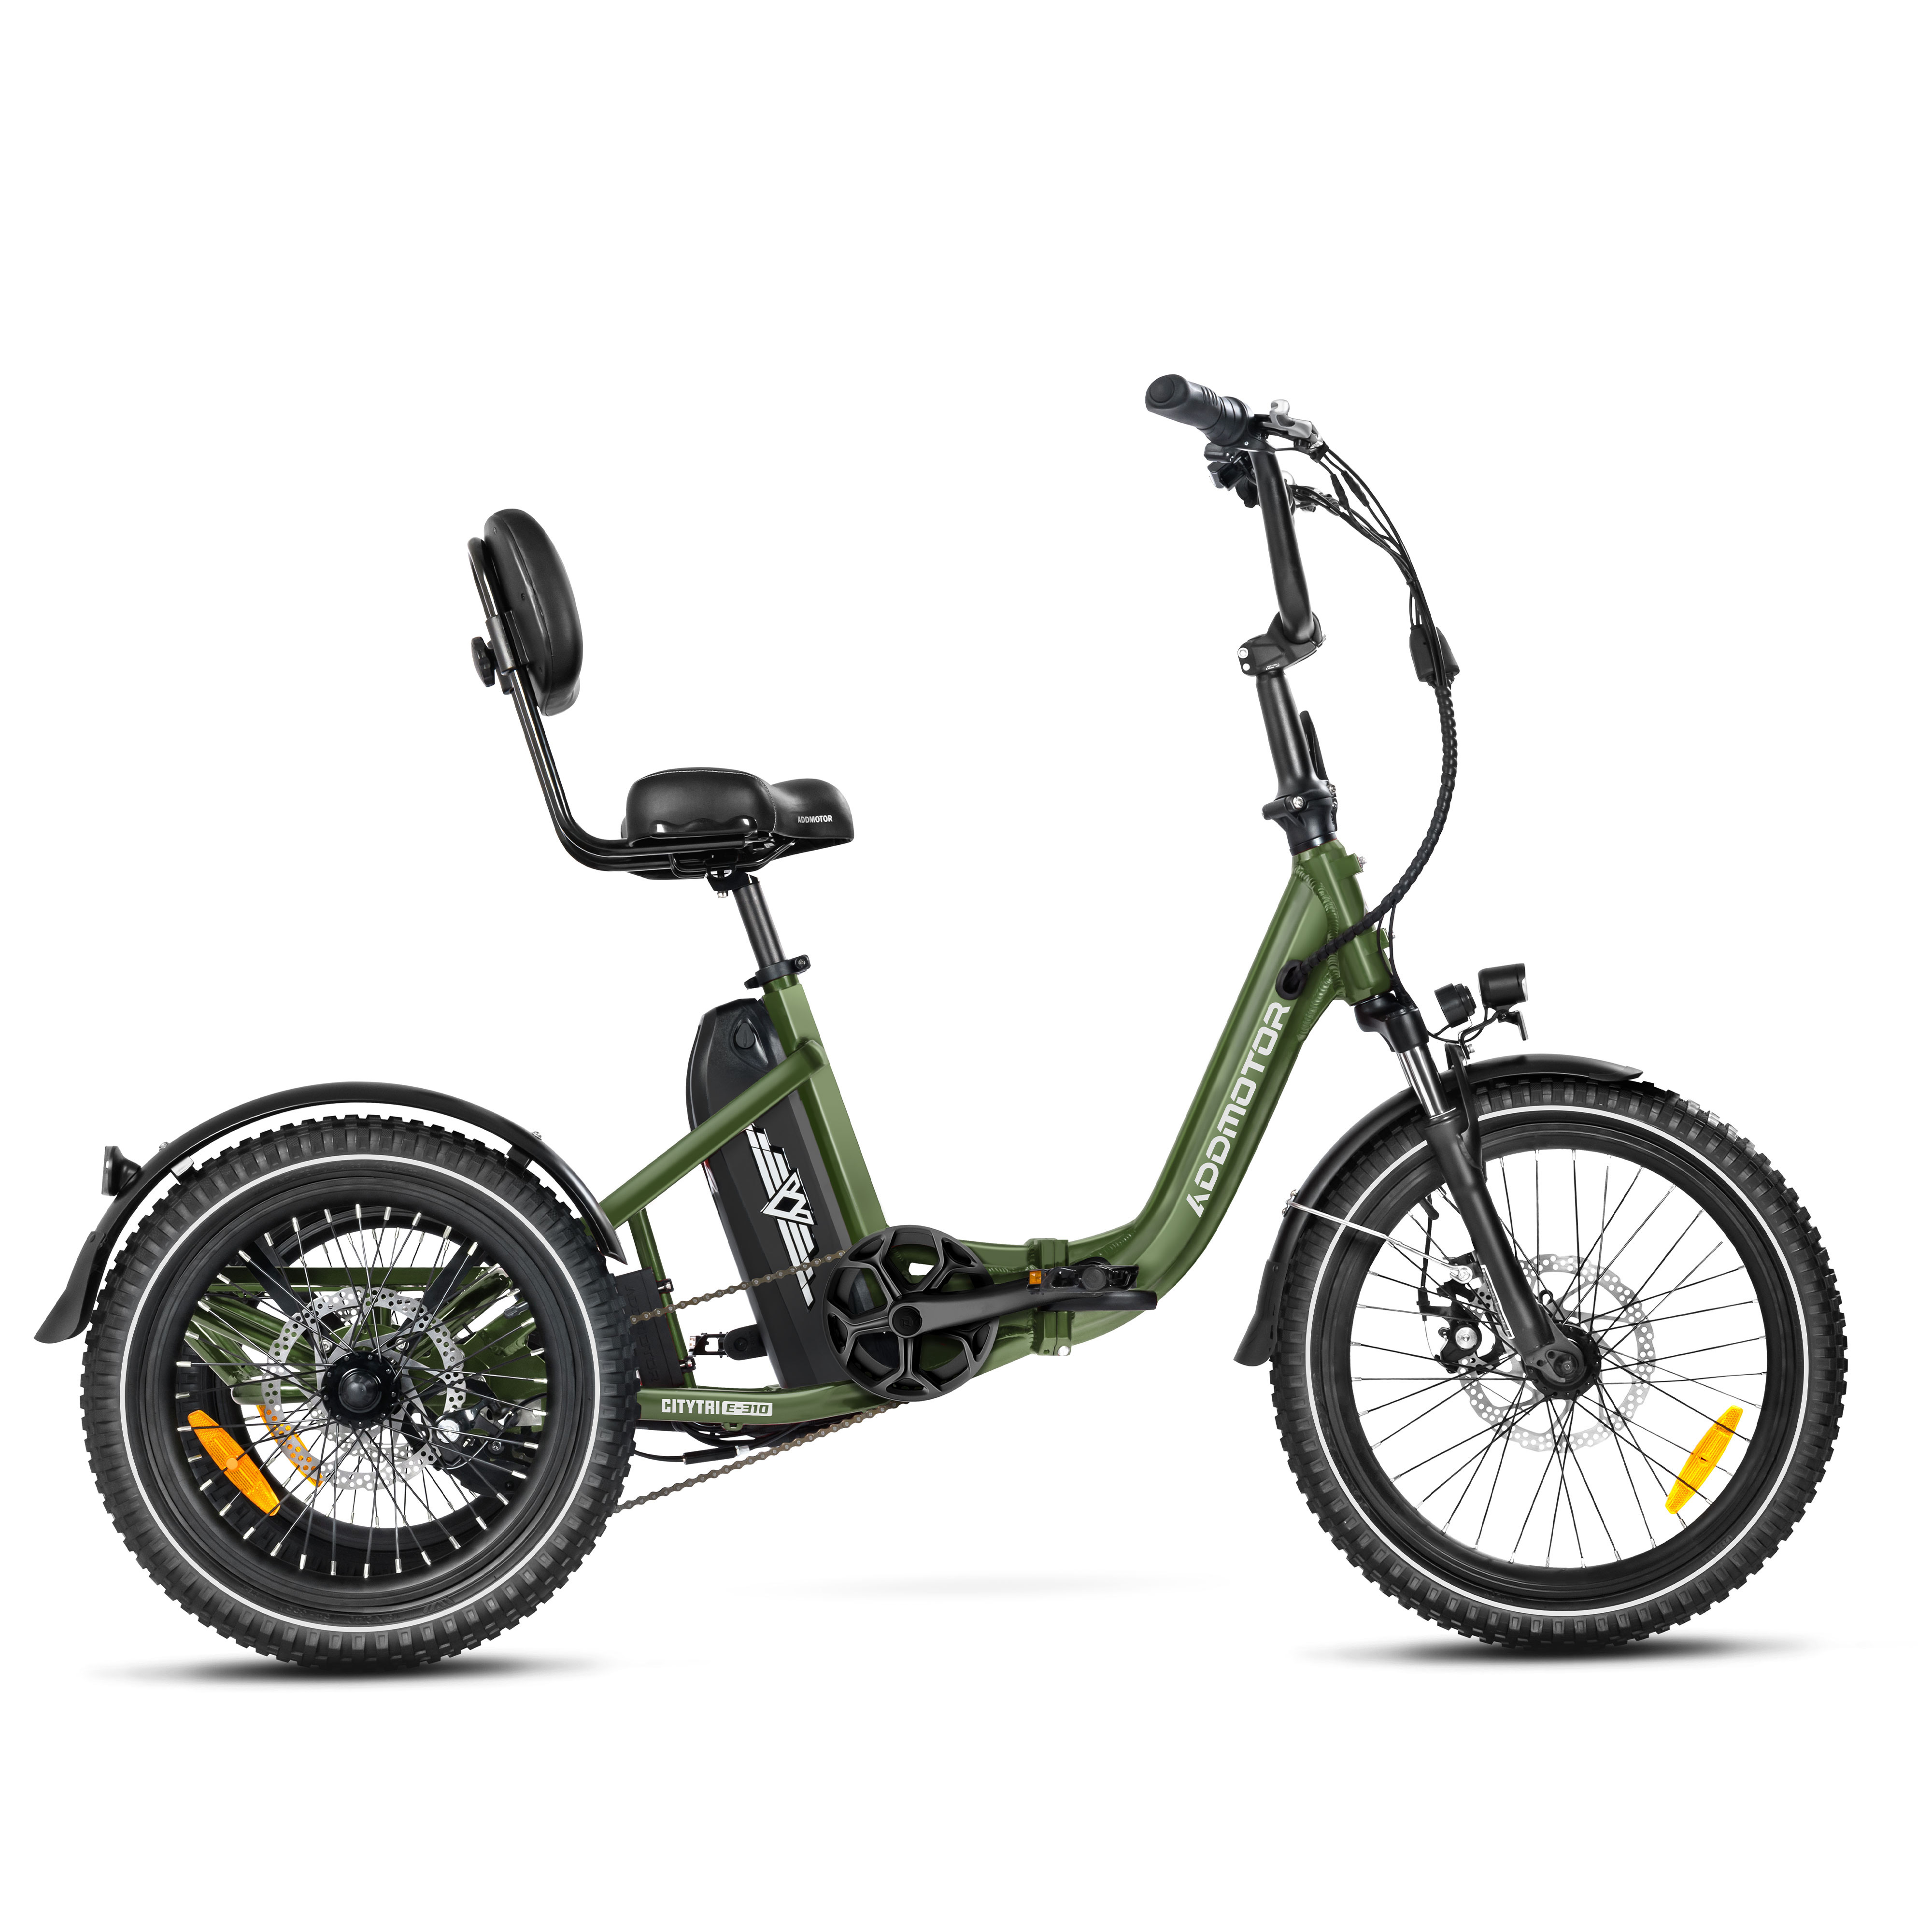 Addmotor Citytri E-310 750W Electric Trike for Adults Best Electric Tricycle Under $2000 Up To 92 Miles - Candy Red